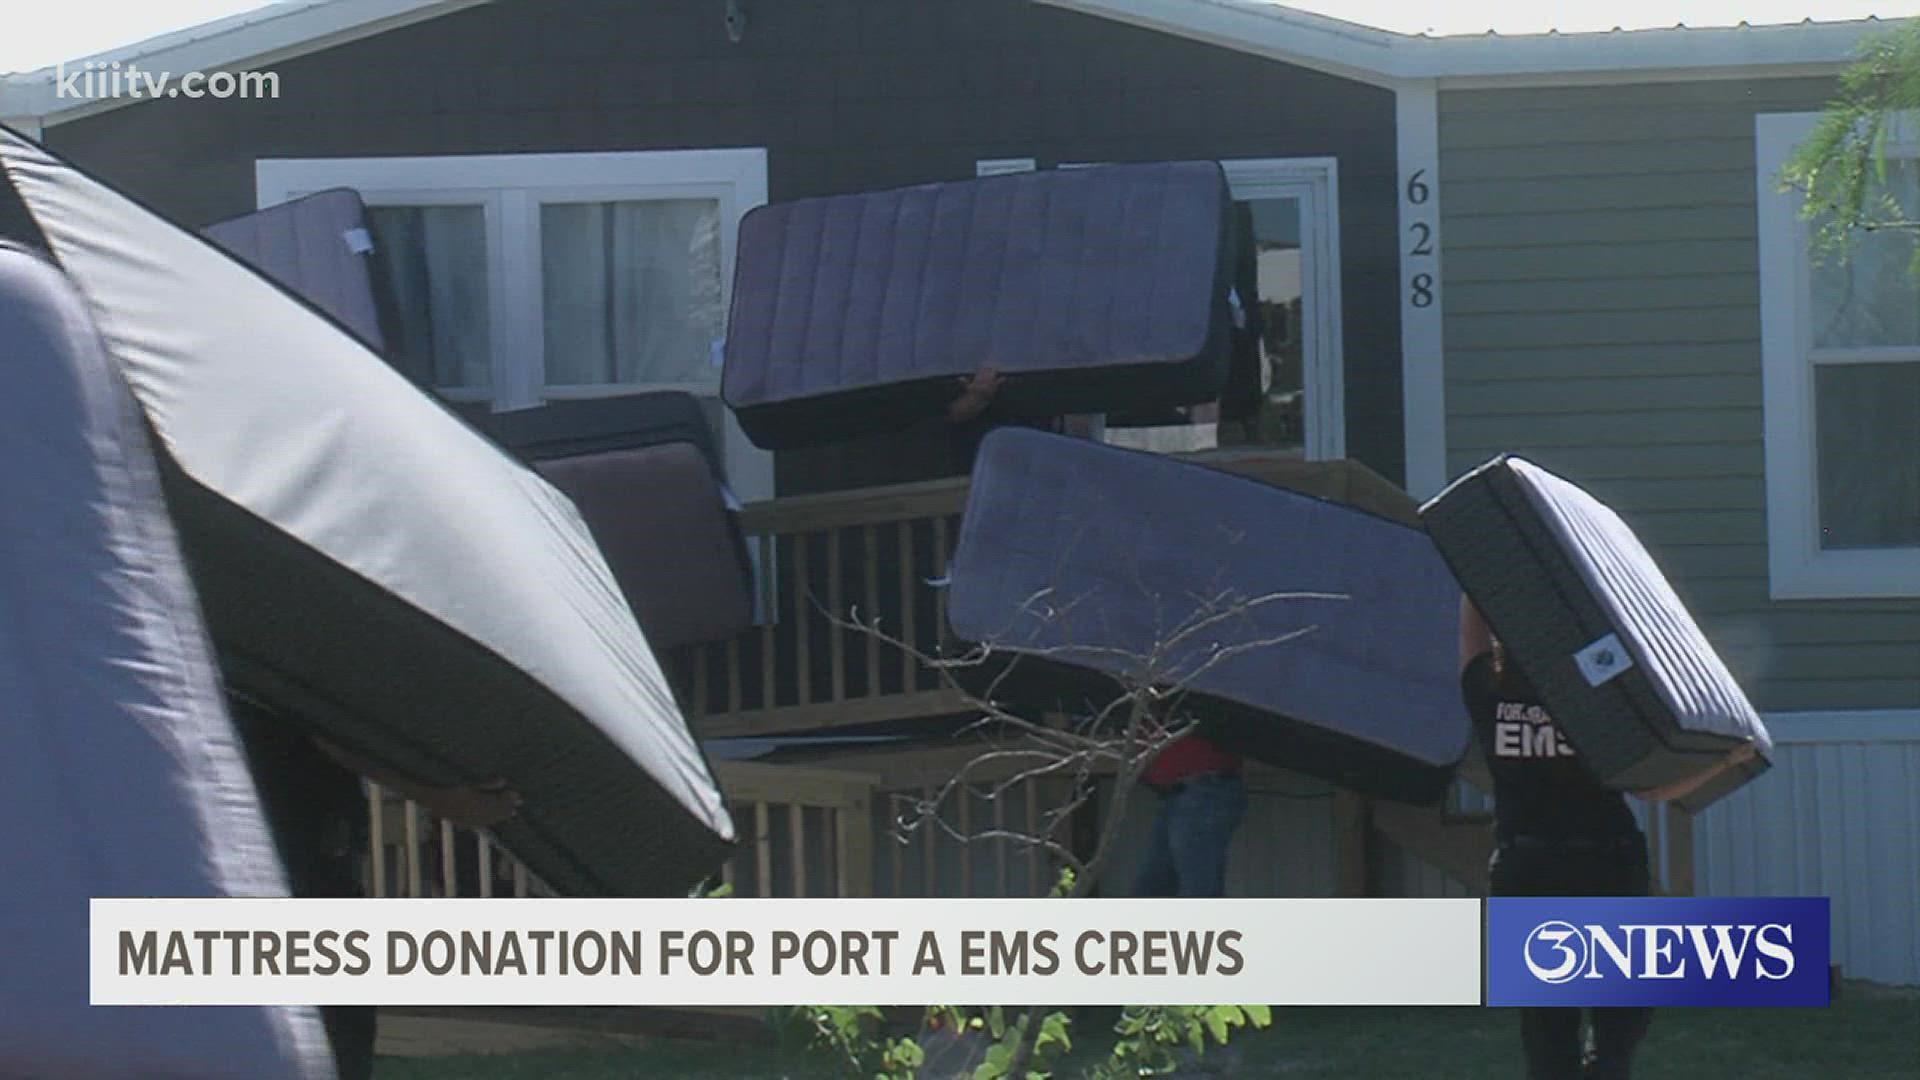 Edwardo Jimenez, EMS Director of the City of Port Aransas, said that the event is meant to show appreciation to those who are hard at work saving others.